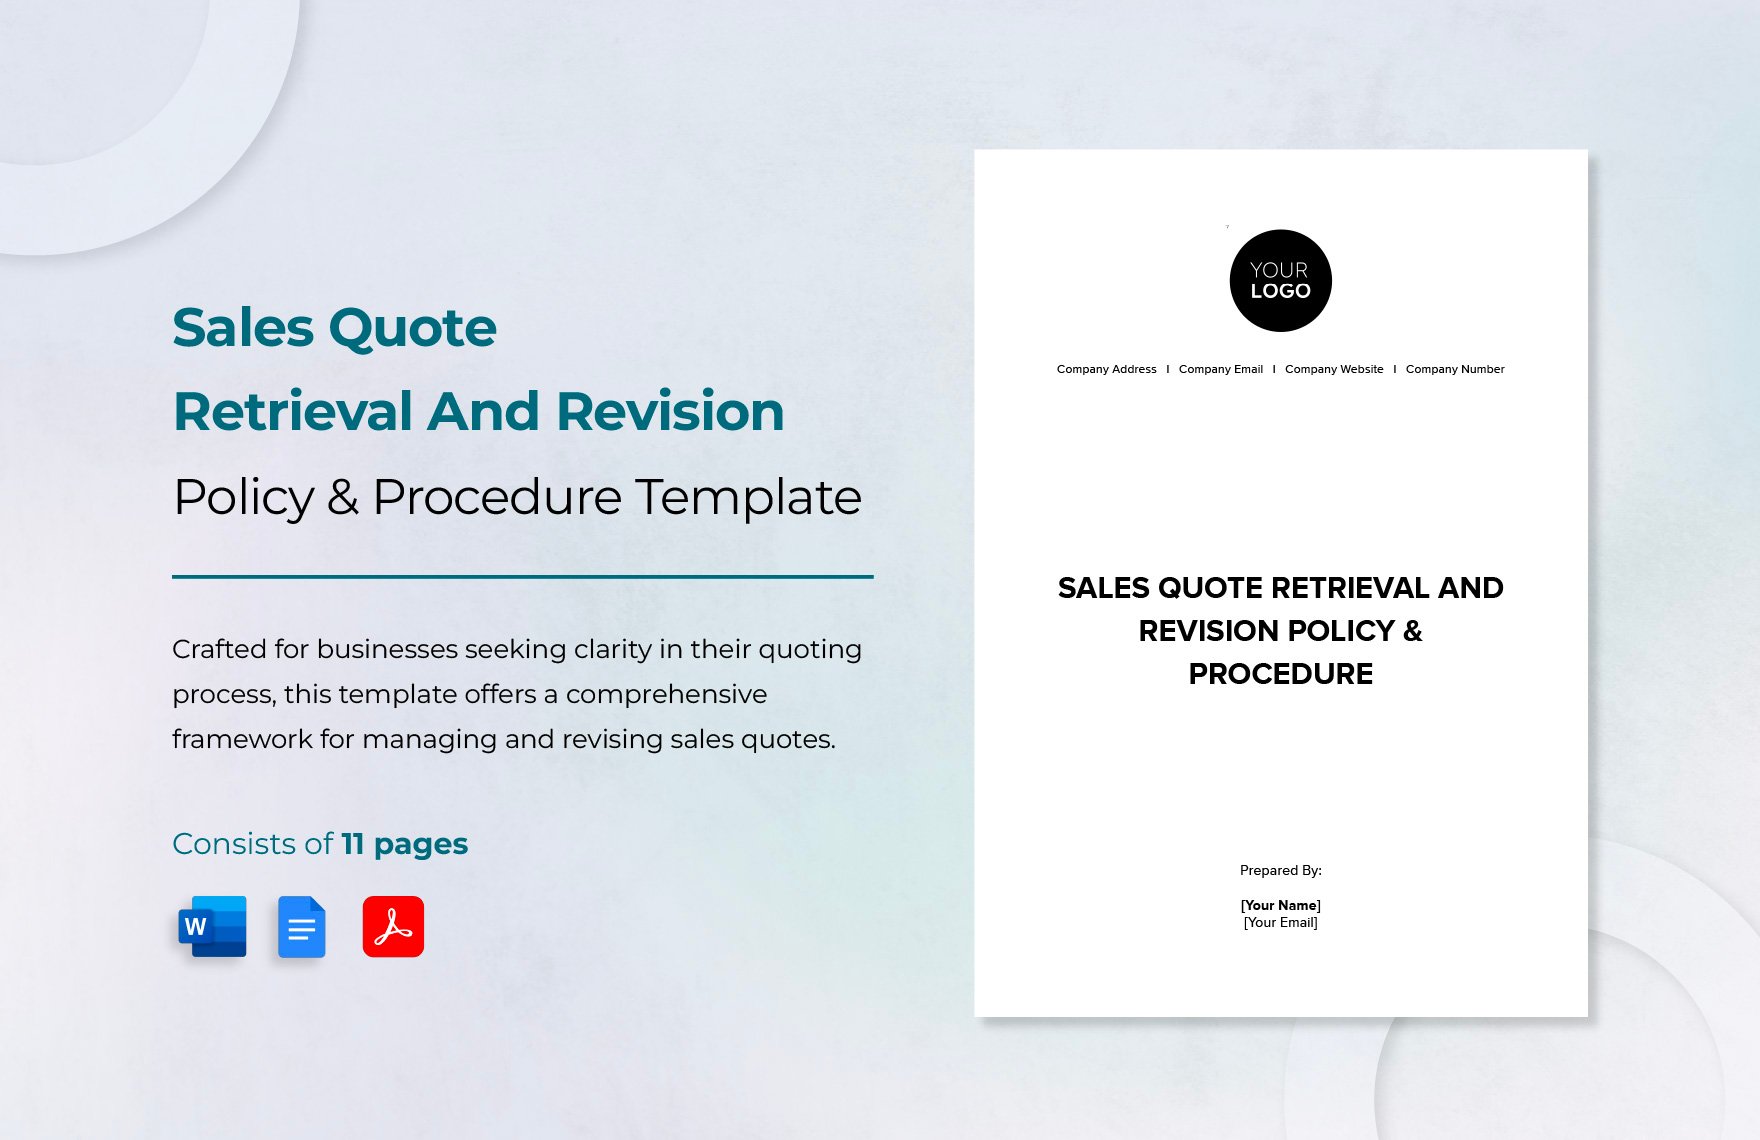 Sales Quote Retrieval and Revision Policy & Procedure Template in Word, Google Docs, PDF